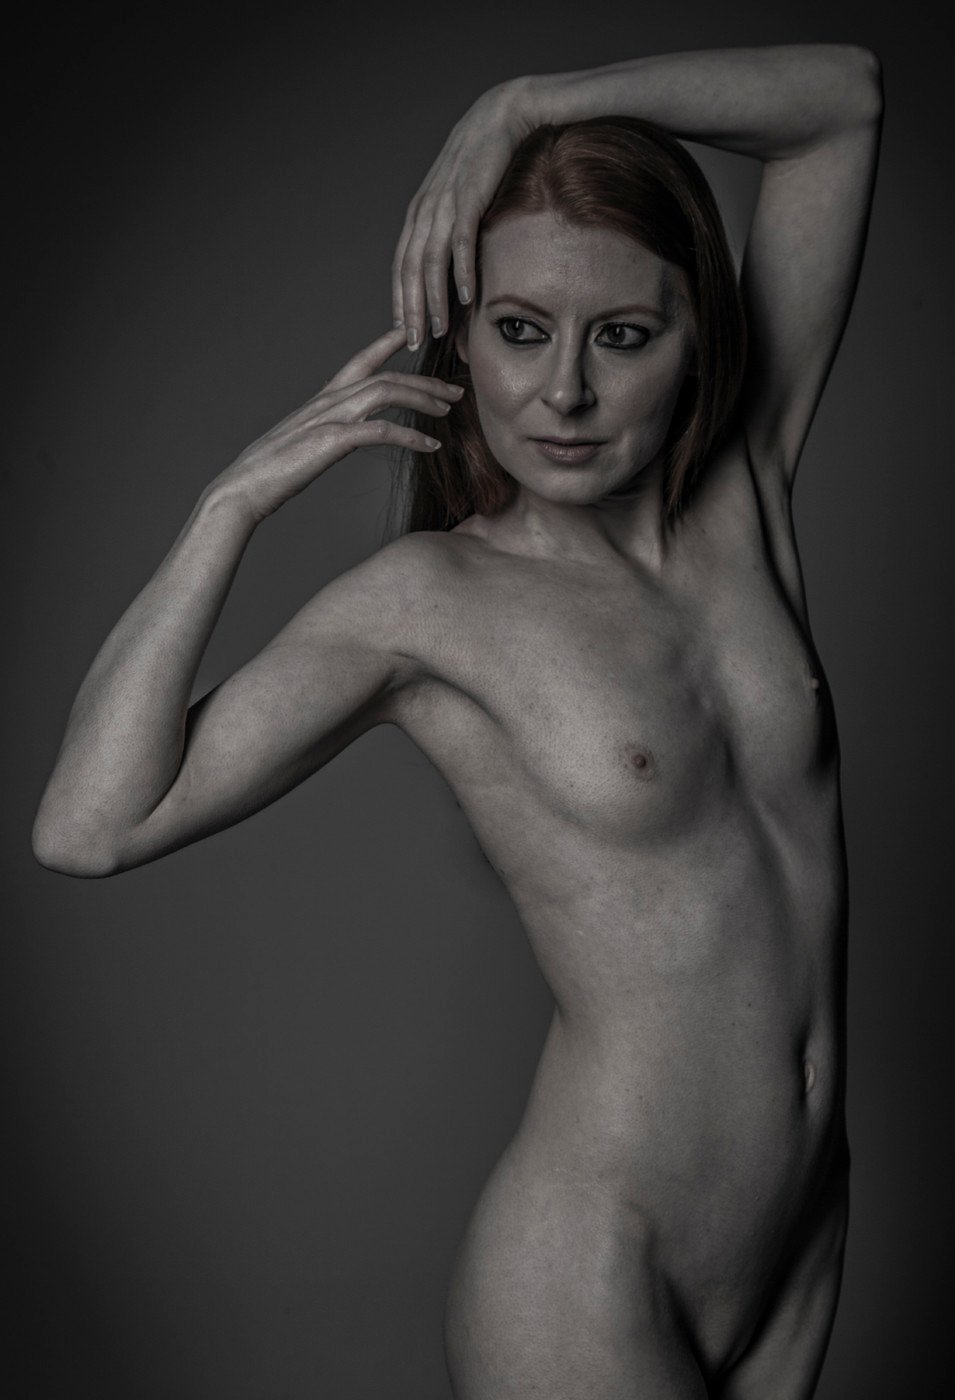 photographer Clearshot art nude modelling photo